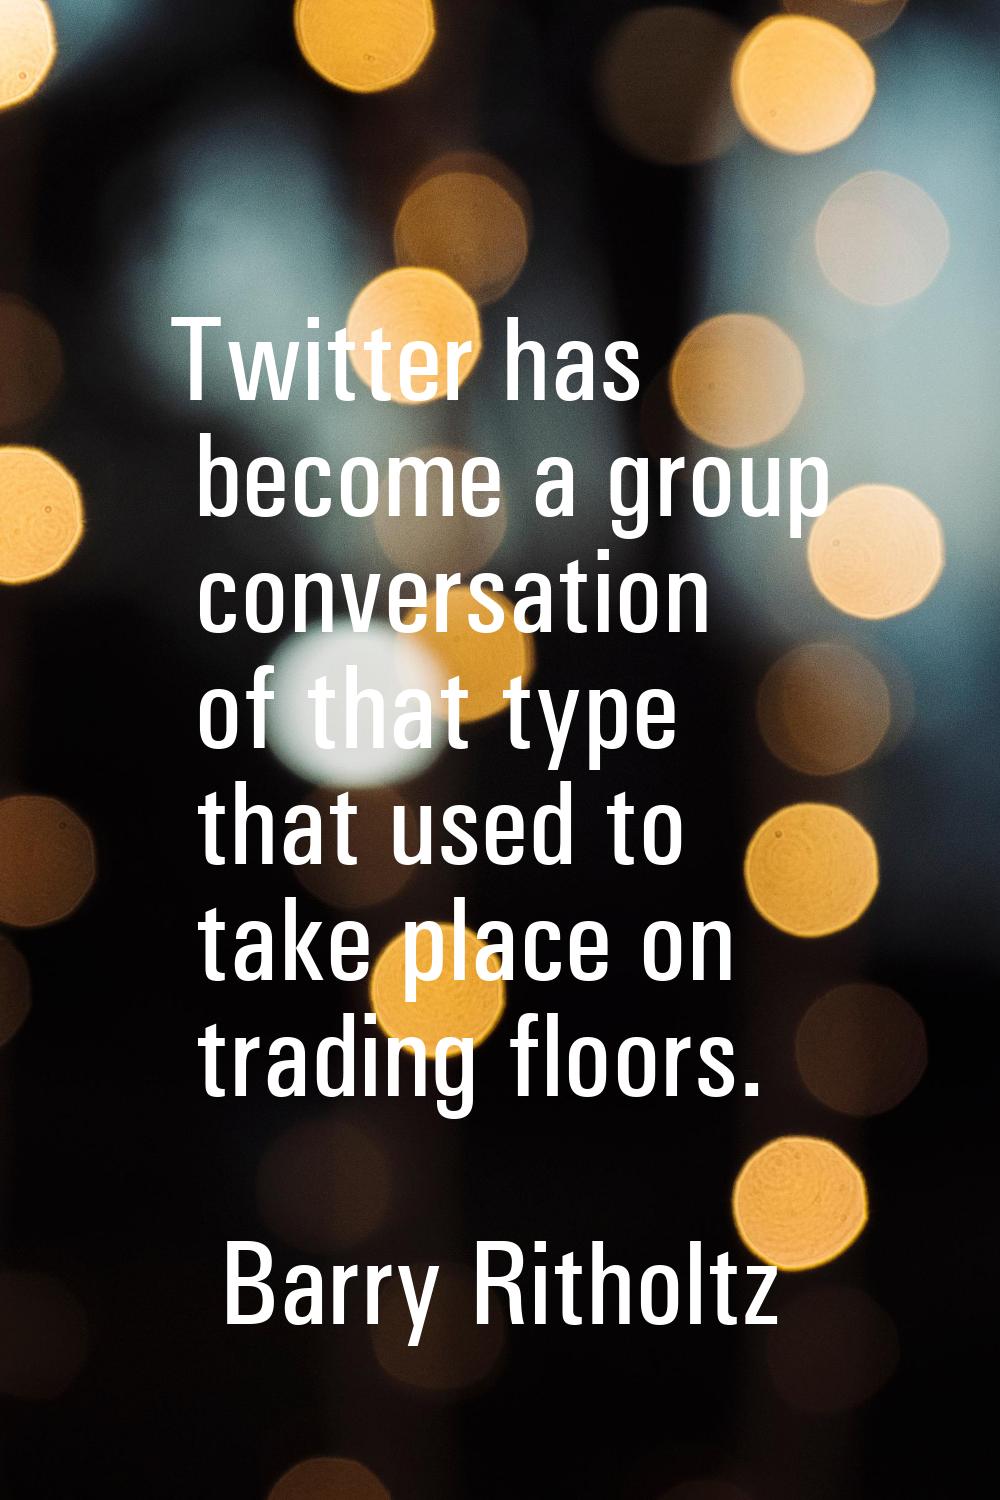 Twitter has become a group conversation of that type that used to take place on trading floors.